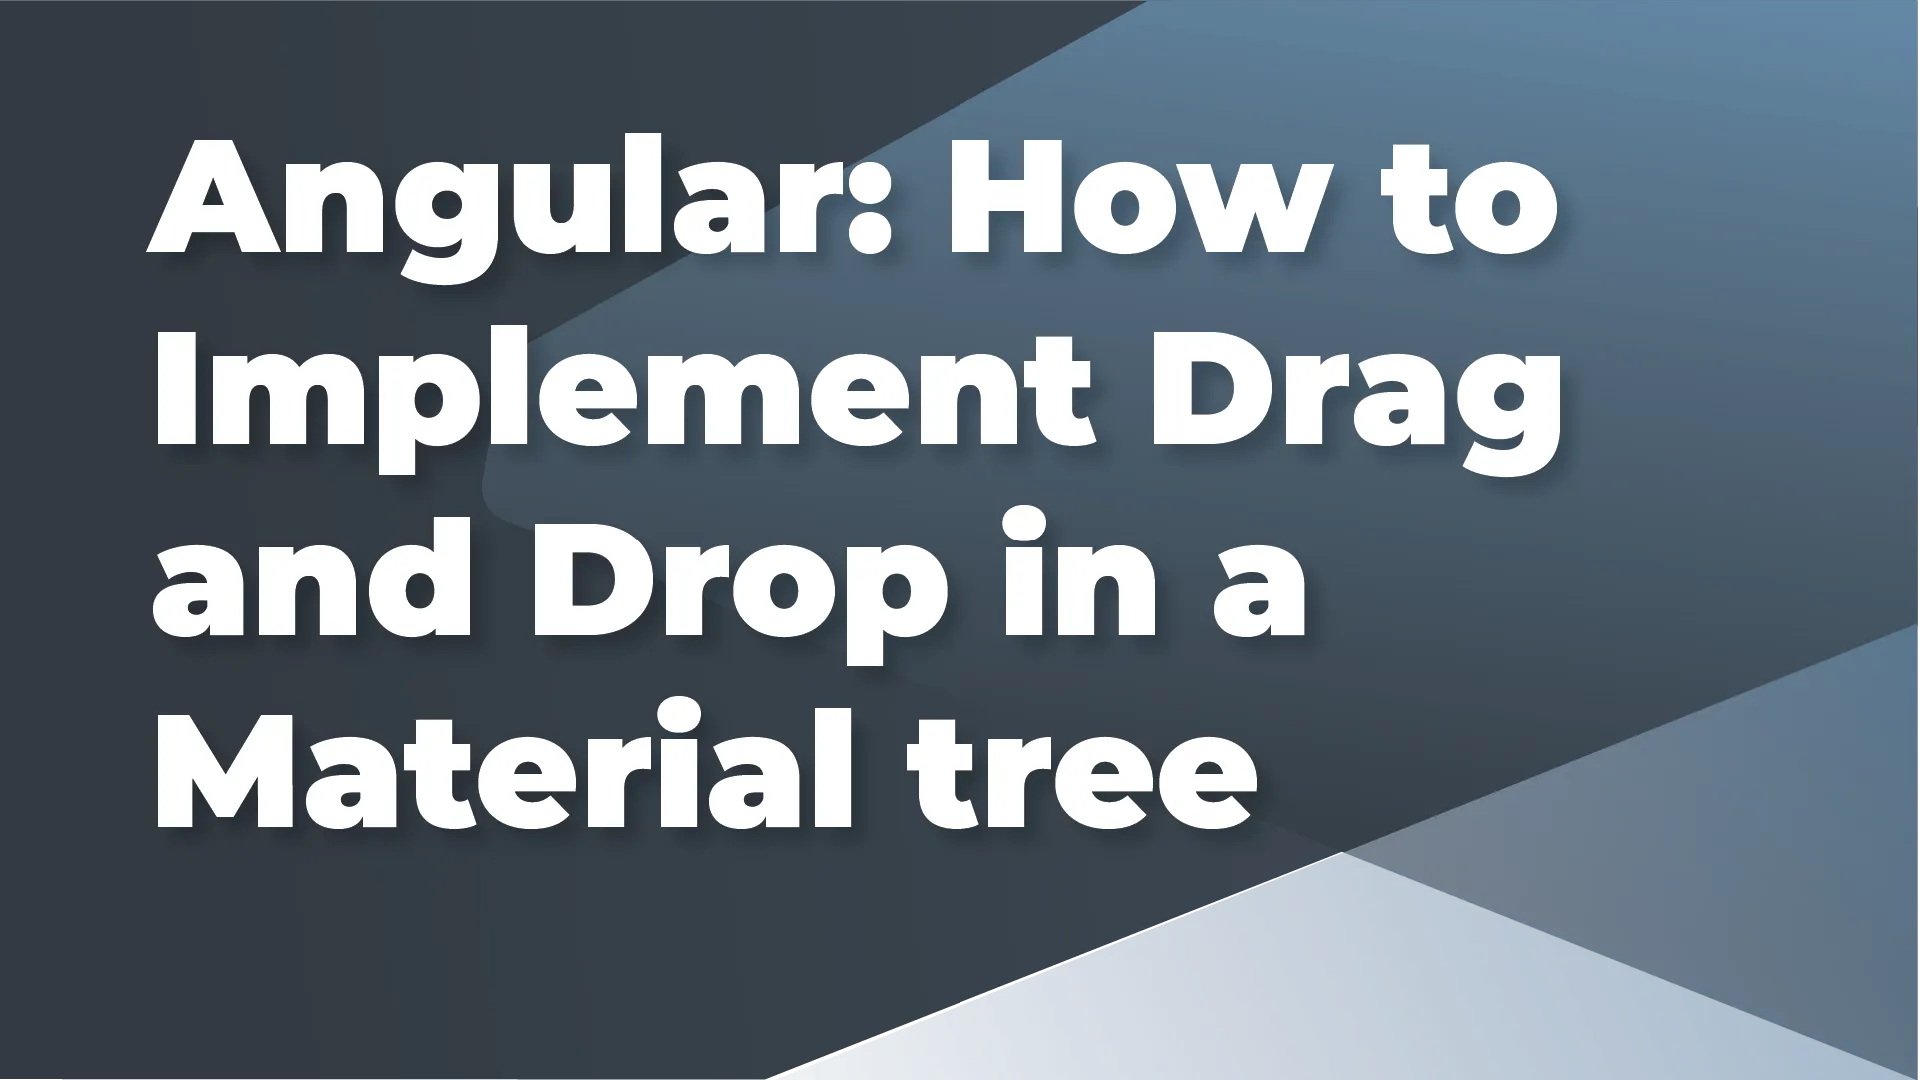 Angular: How to Implement Drag and Drop in a Material tree